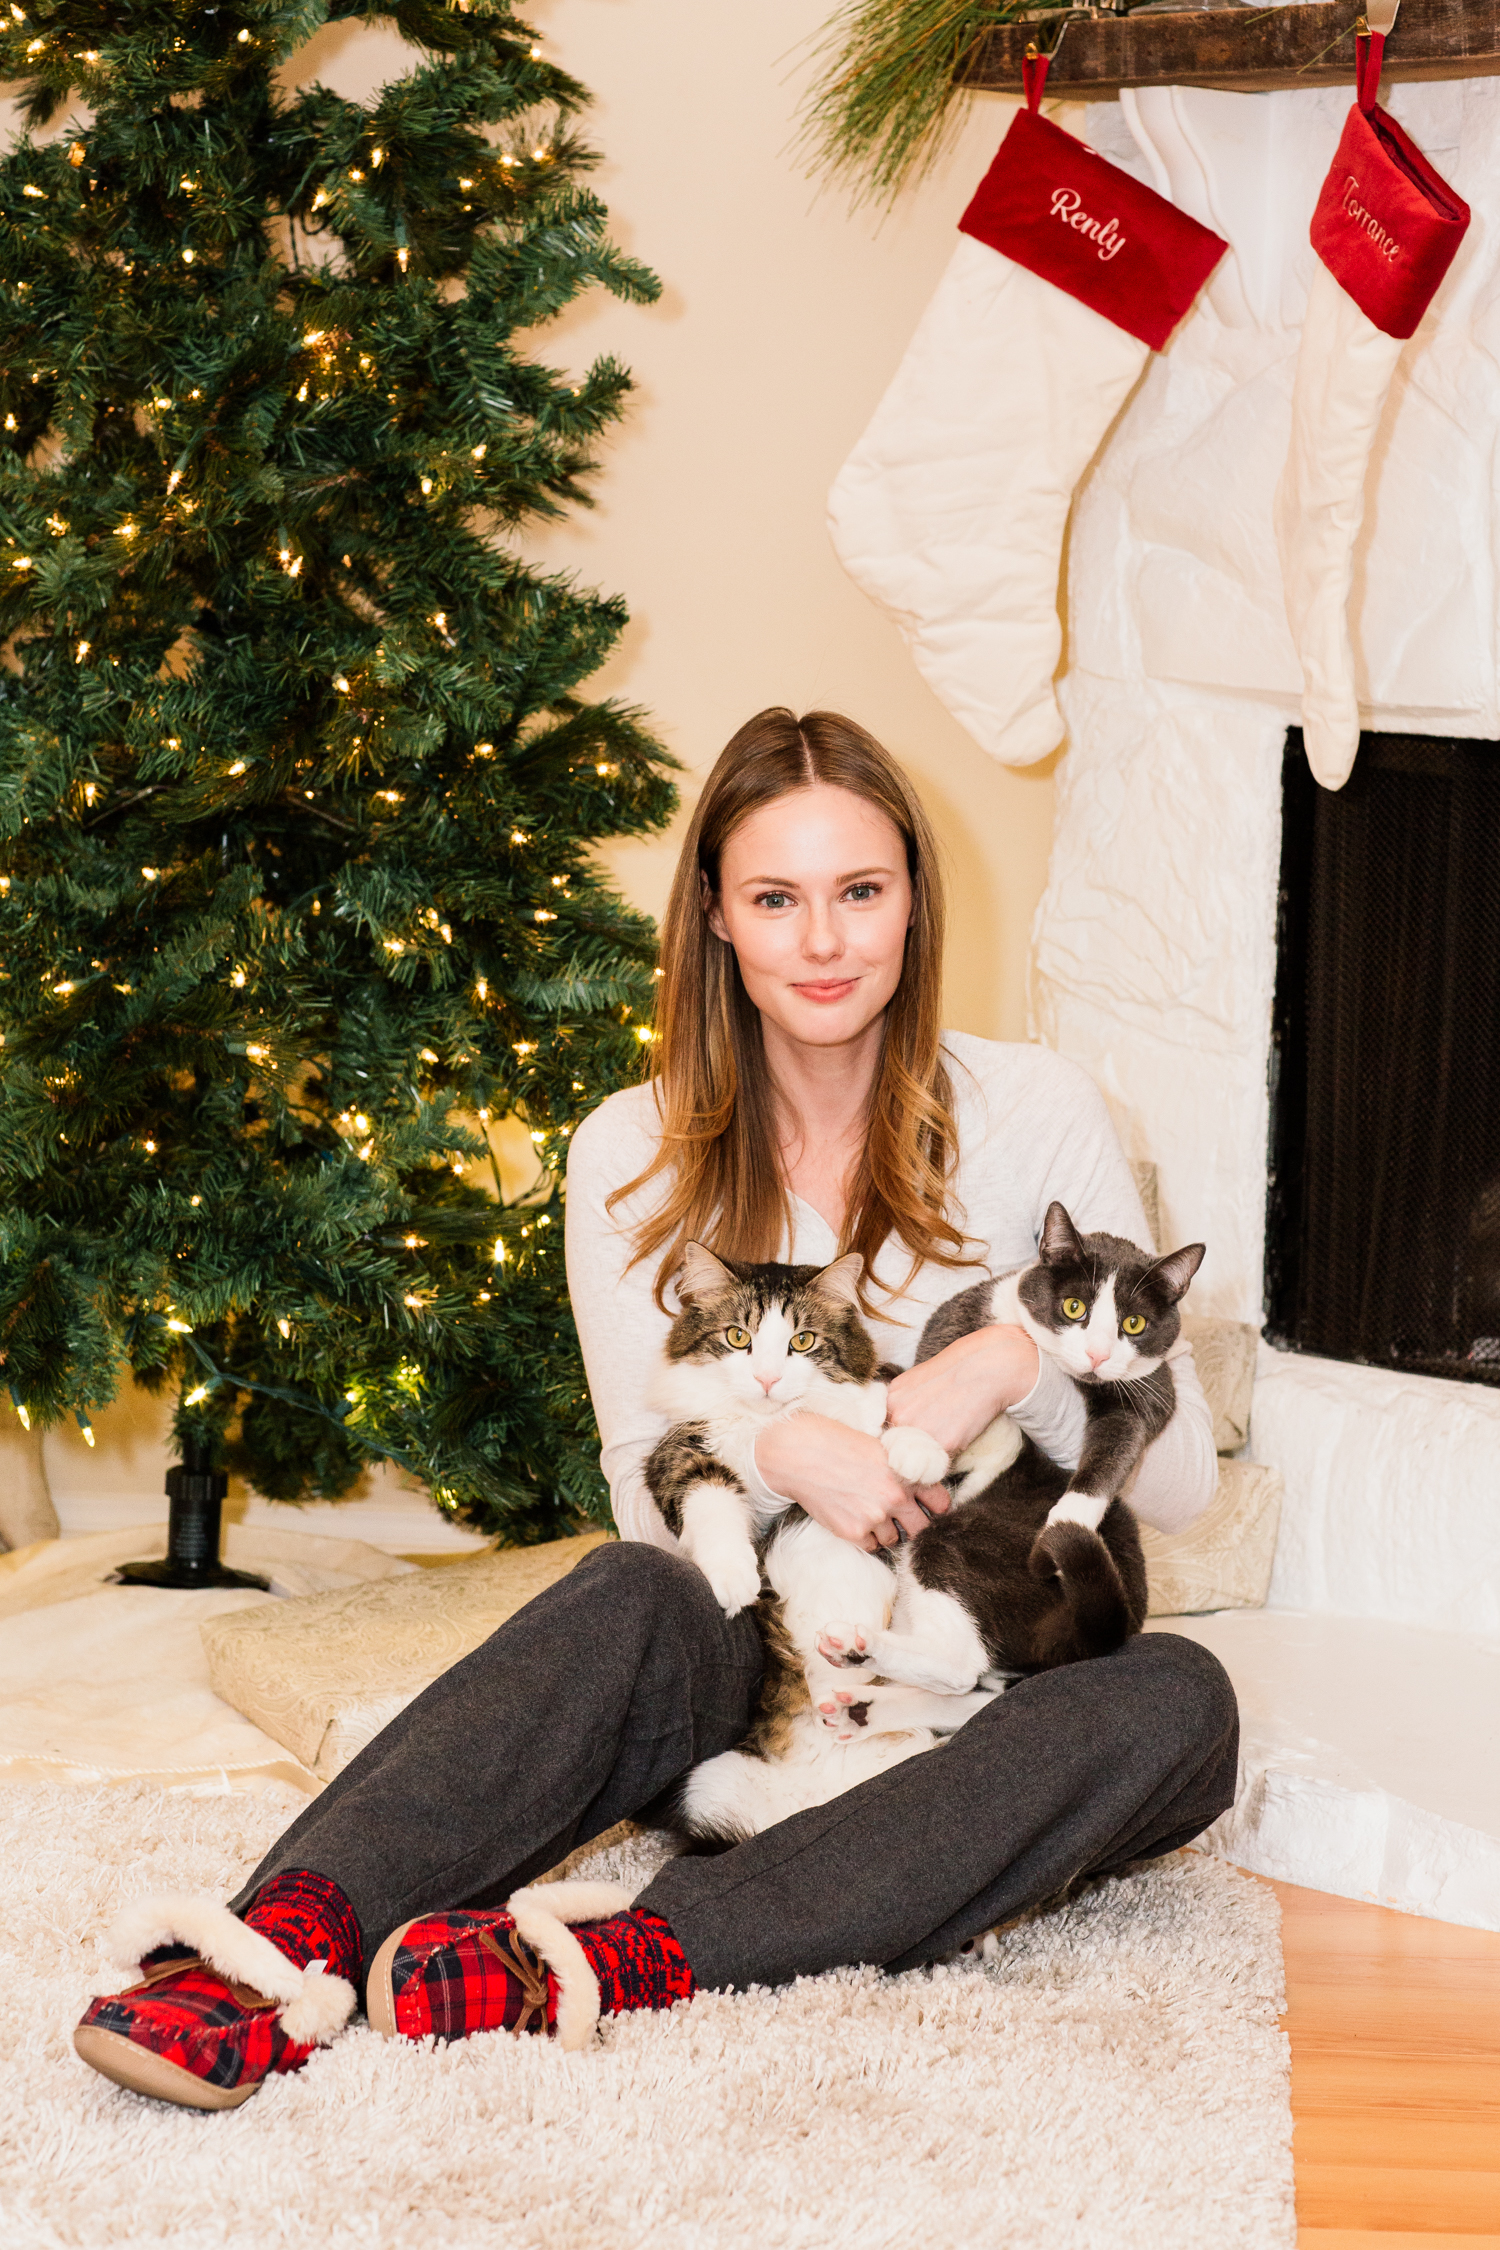 Miss USA 2011 Alyssa Campanella of The A List blog celebrates Christmas with her cats Renly and Daenerys Coombs at home